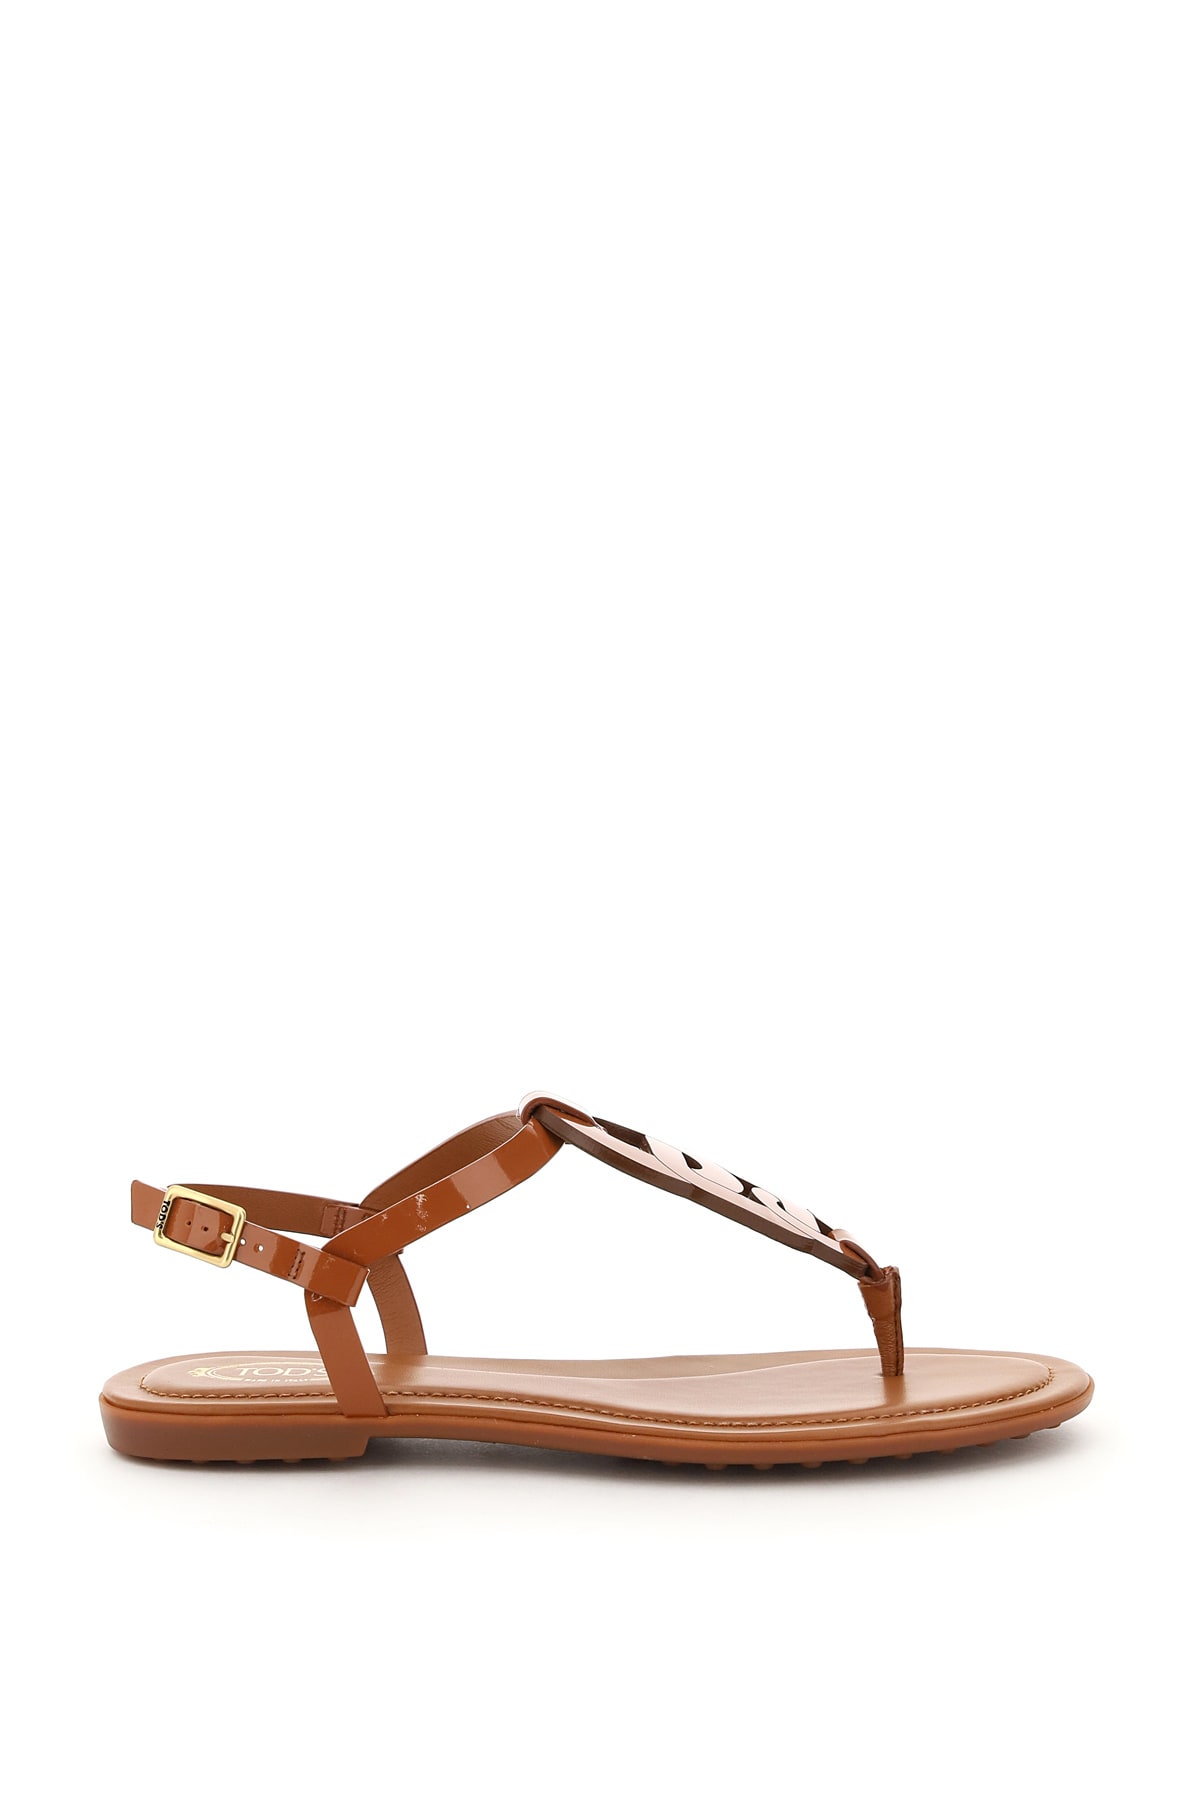 Photo of  Tods Chain Thong Sandals- shop Tods Sandals online sales